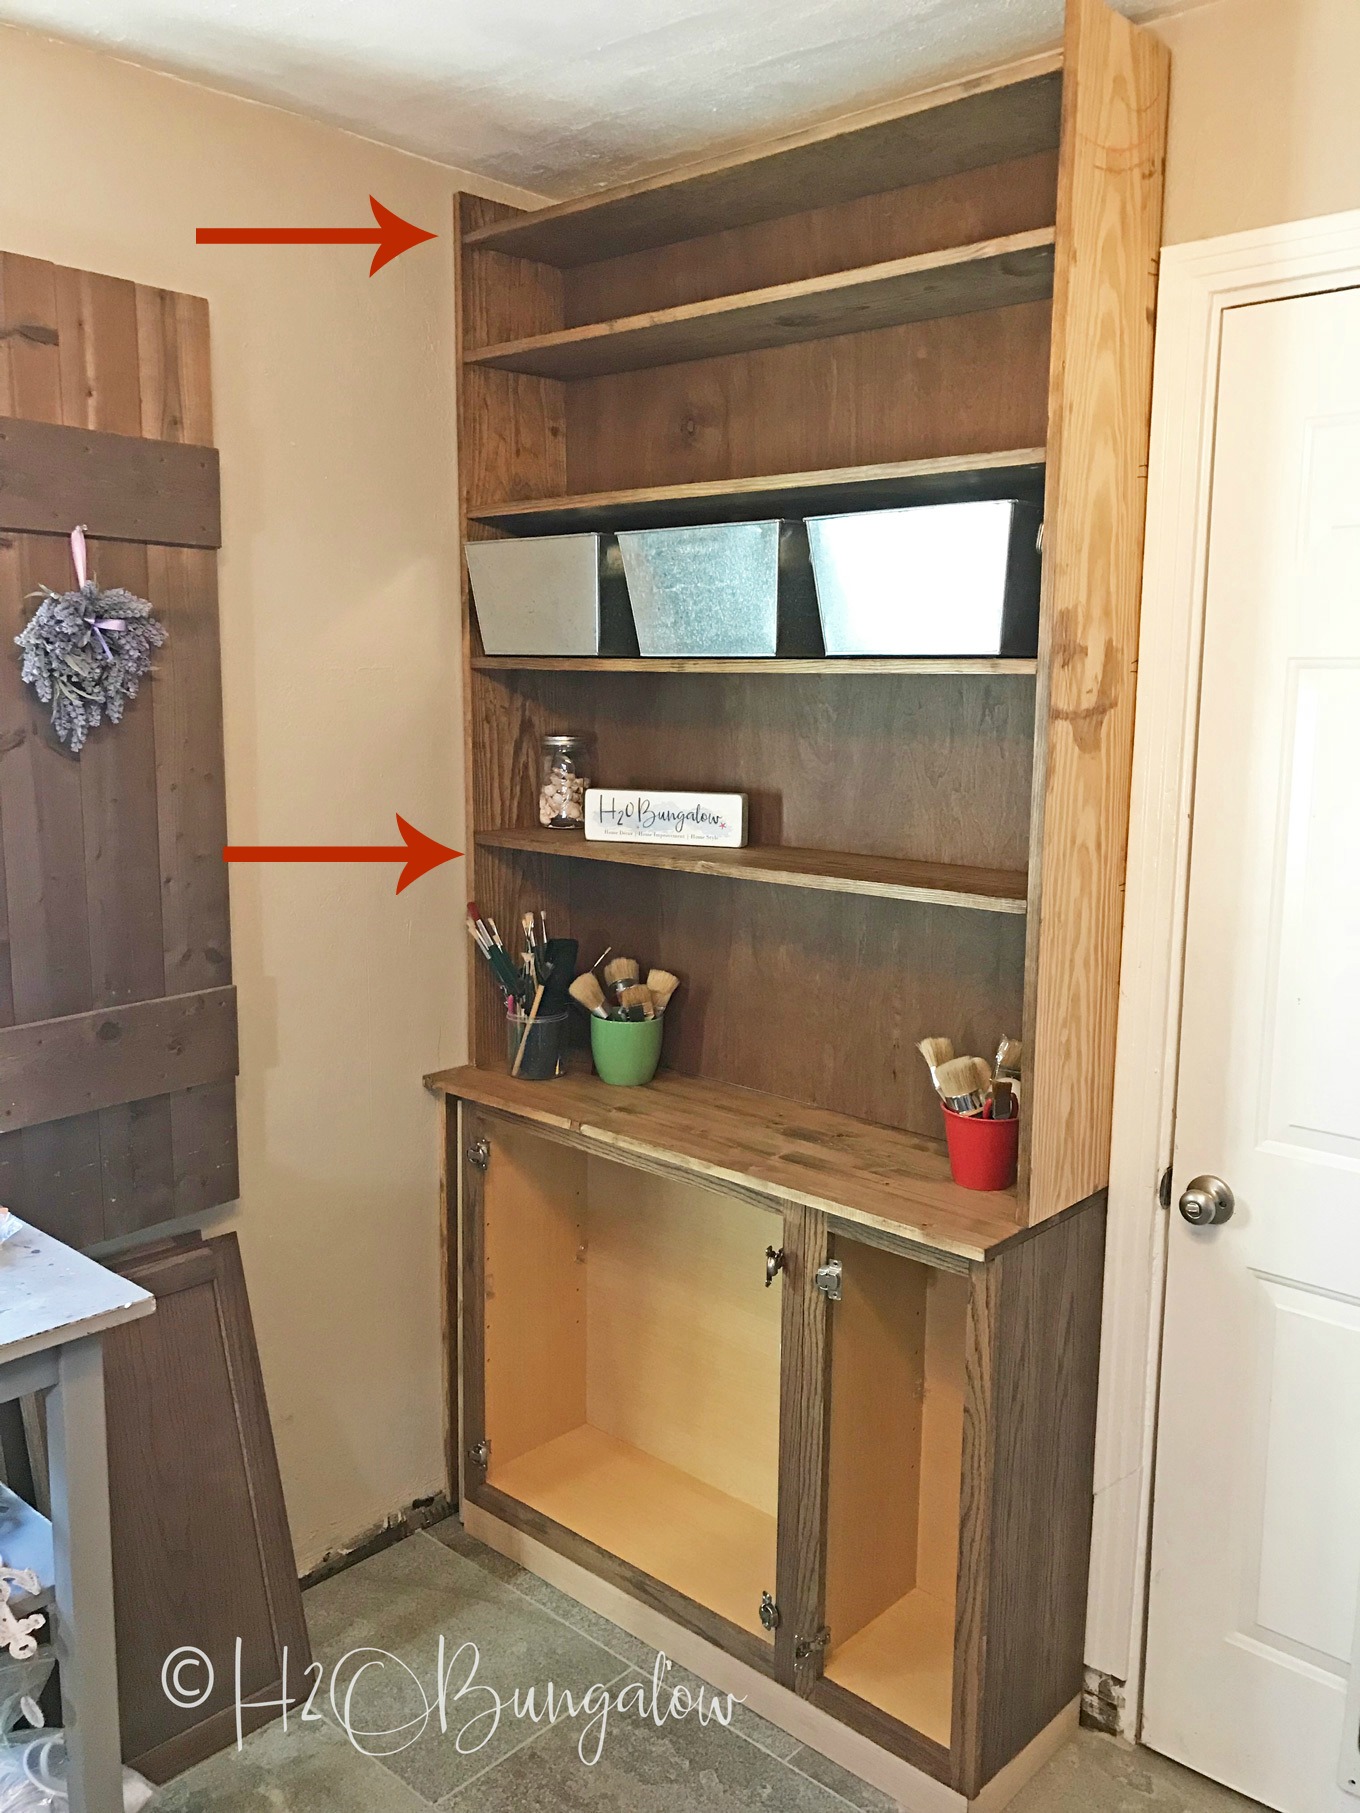 How to build built in bookcases with cabinets is a detailed DIY tutorial with lots of pictures and step by step instructions.  If you want storage and to make custom DIY book cases or want to know how to make built in bookshelves with wall cabinets, this is the tutorial for you. My built ins cost me under $400 to make! 